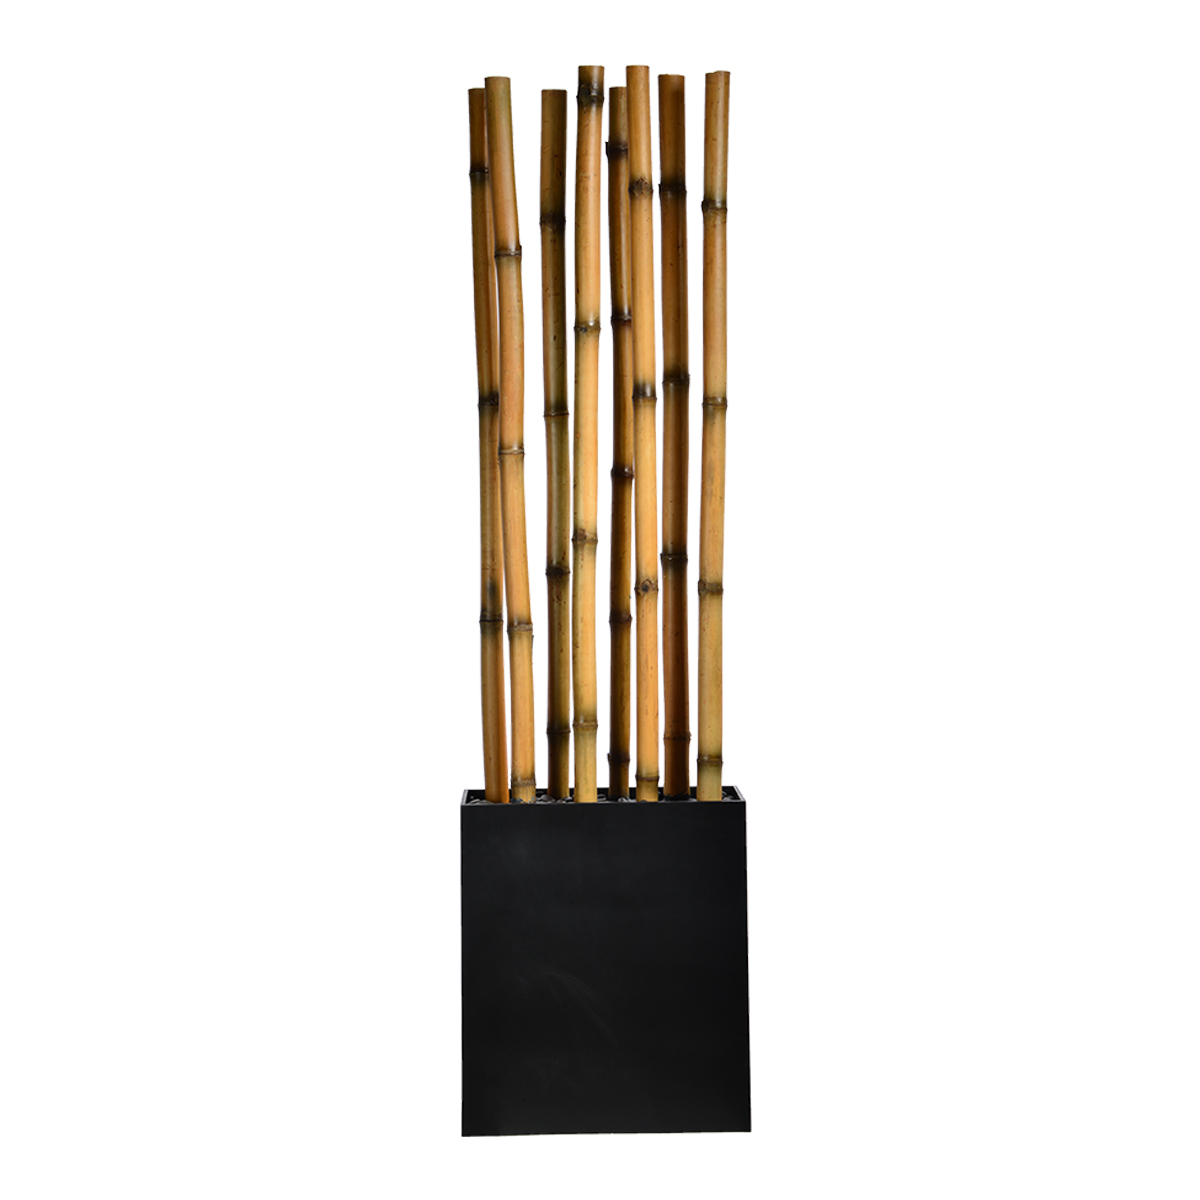 Vhx302 60 In. 8 Poles Bamboo, High Gloss Natural Color With Wooden Planter